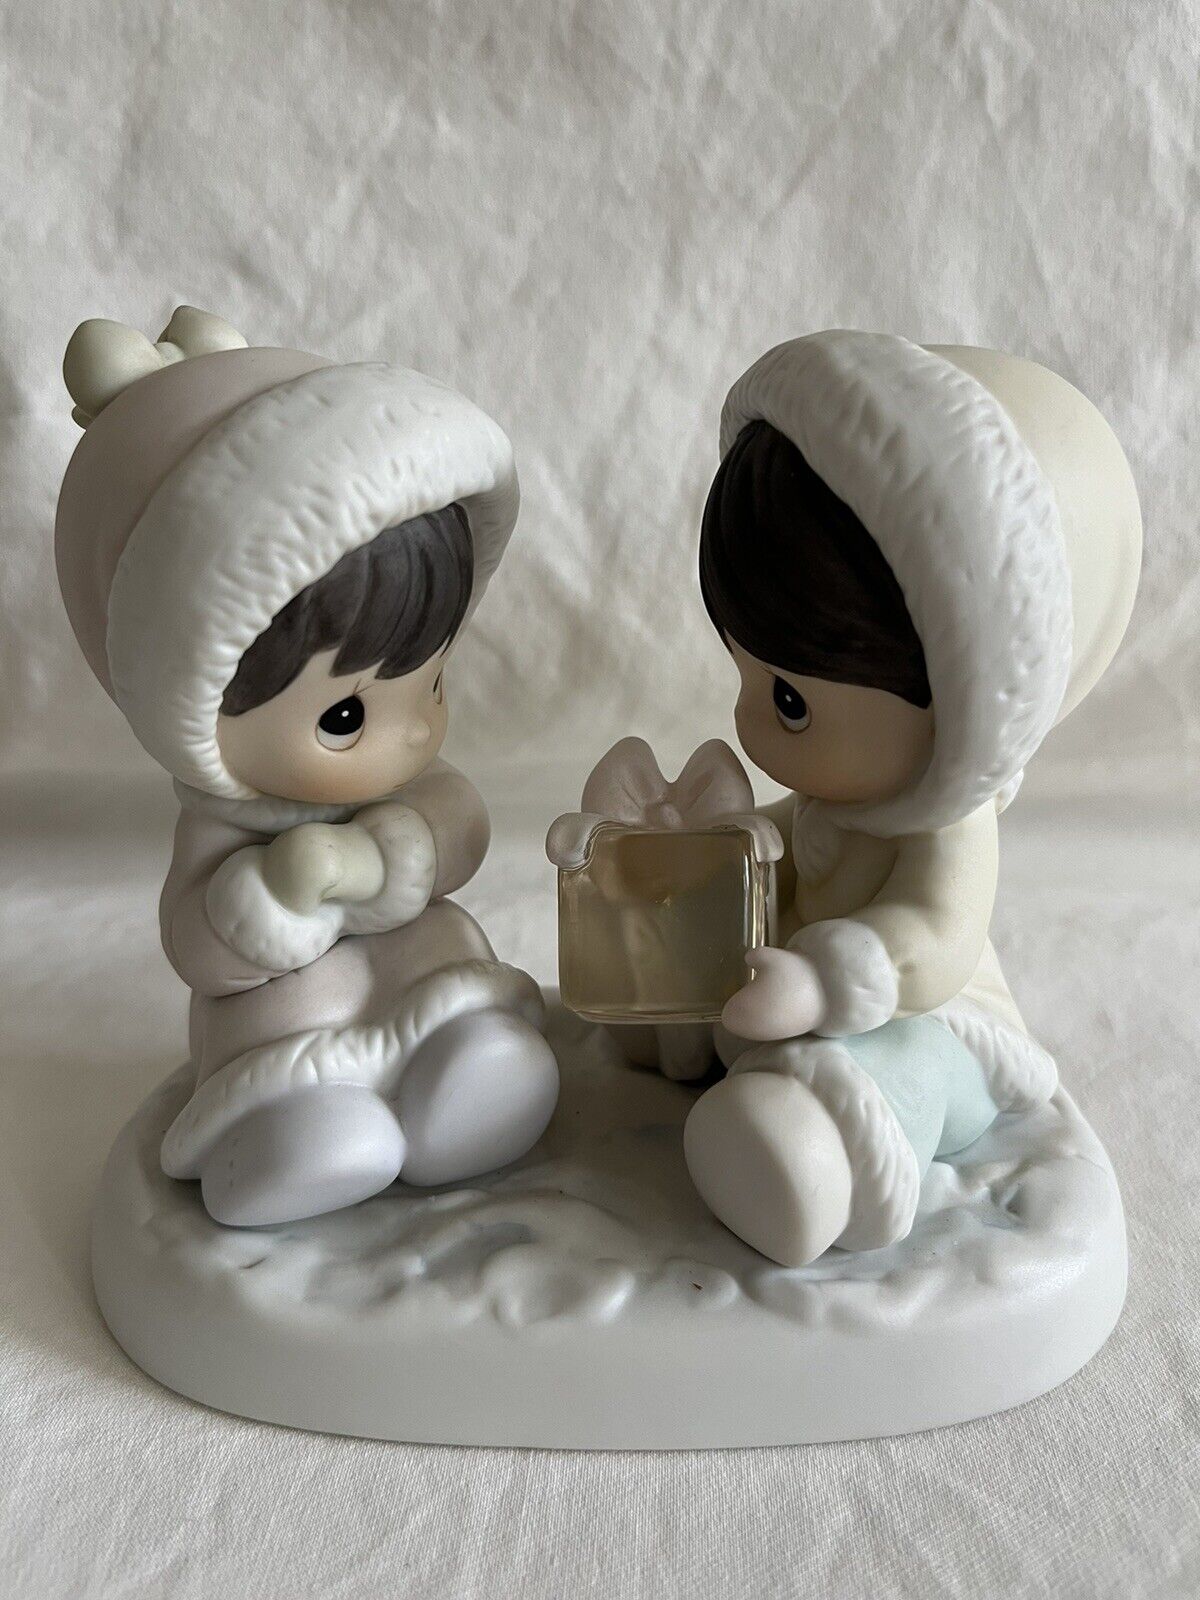 Previous Moments “I Only Have Ice For You” Figurine. Excellent Condition